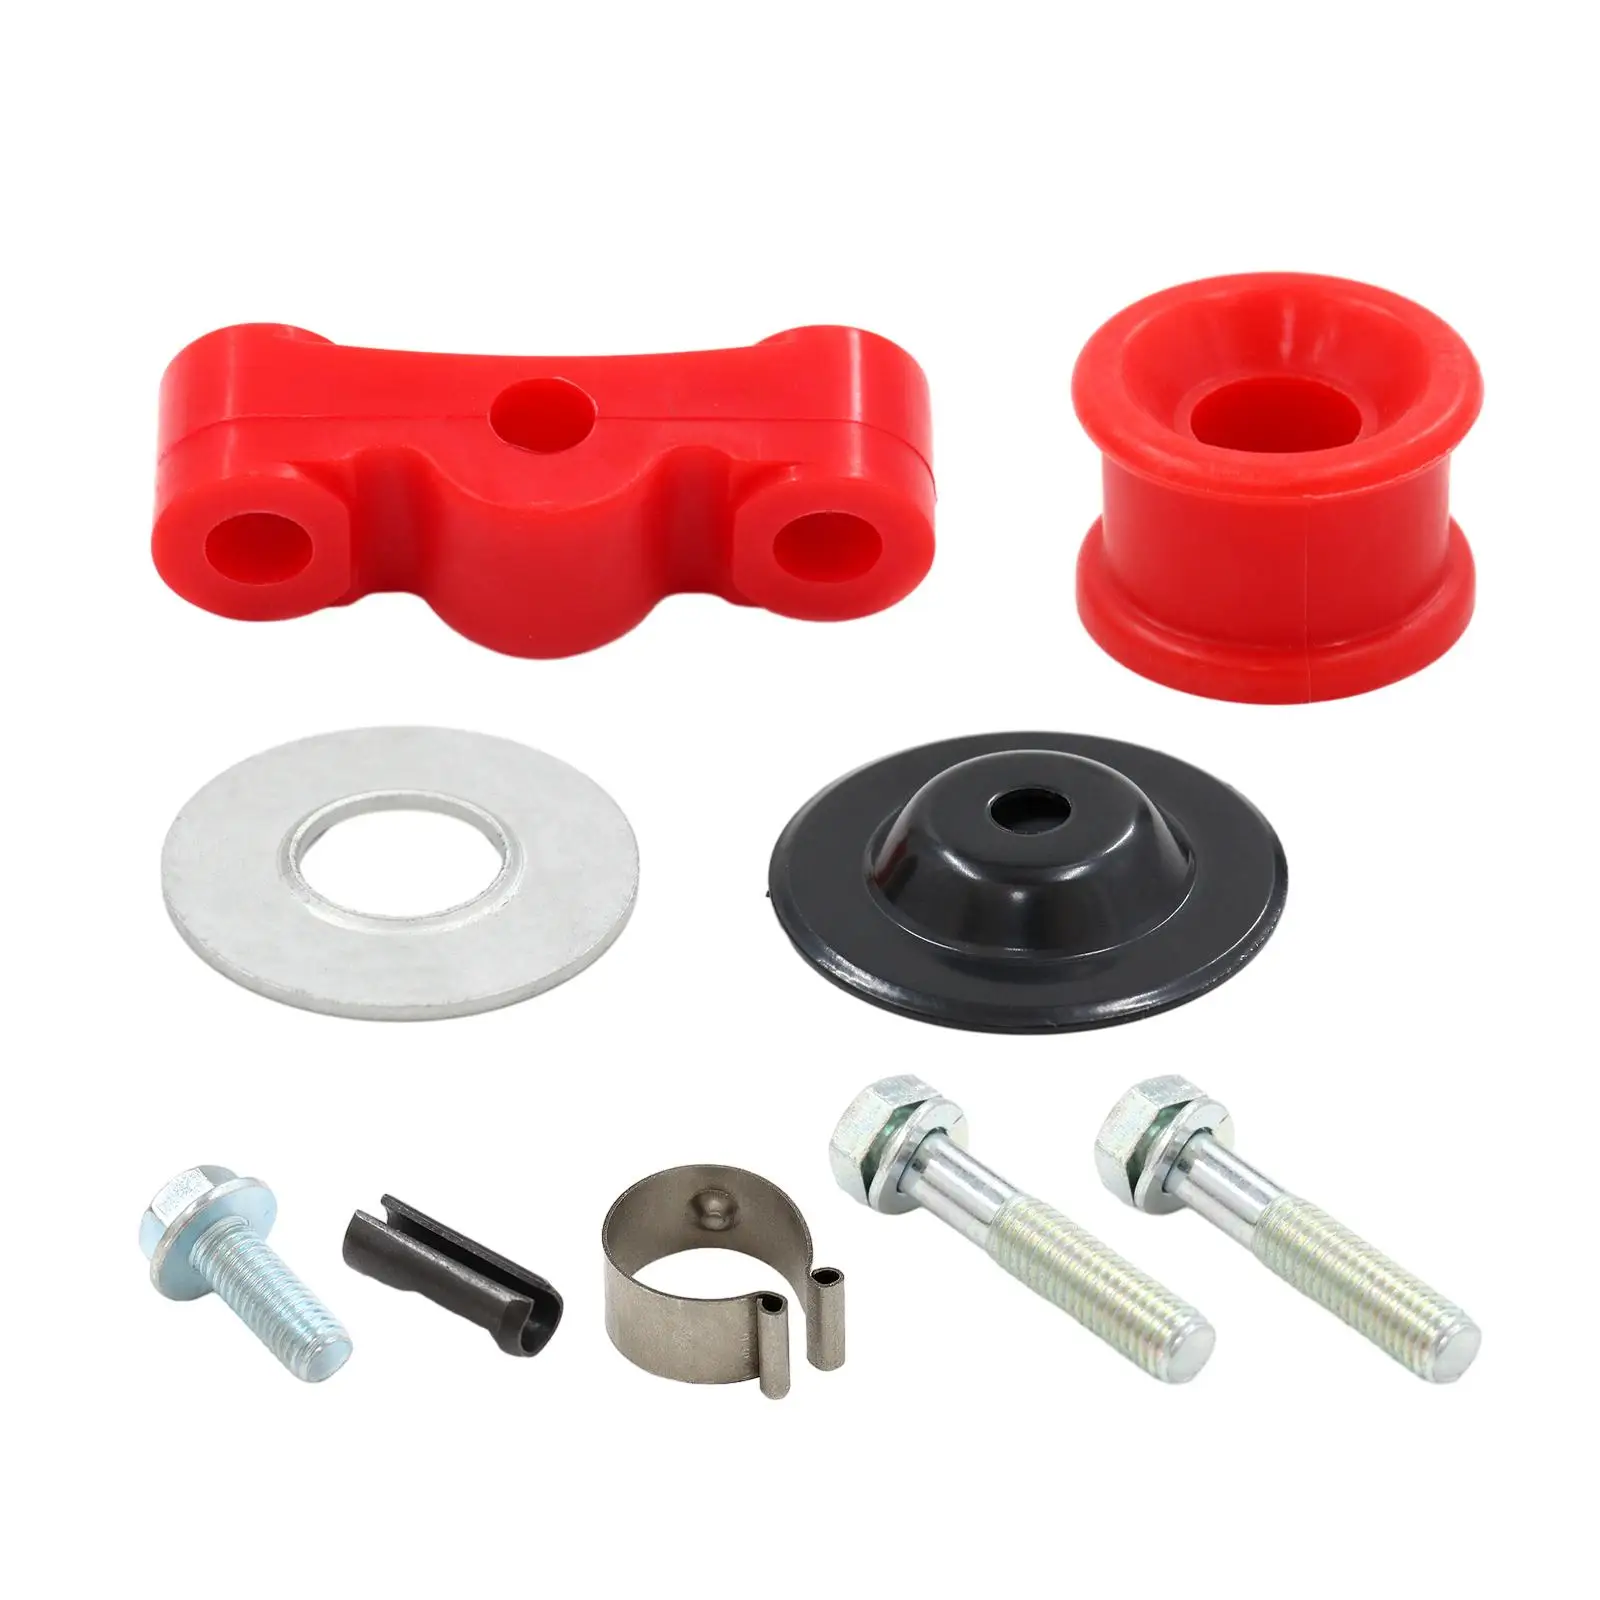 Red Shift Linkage Bushings Kit Auto Accessories Replaces for Honda with B Series Swap Sturdy High Reliability Durable Quality